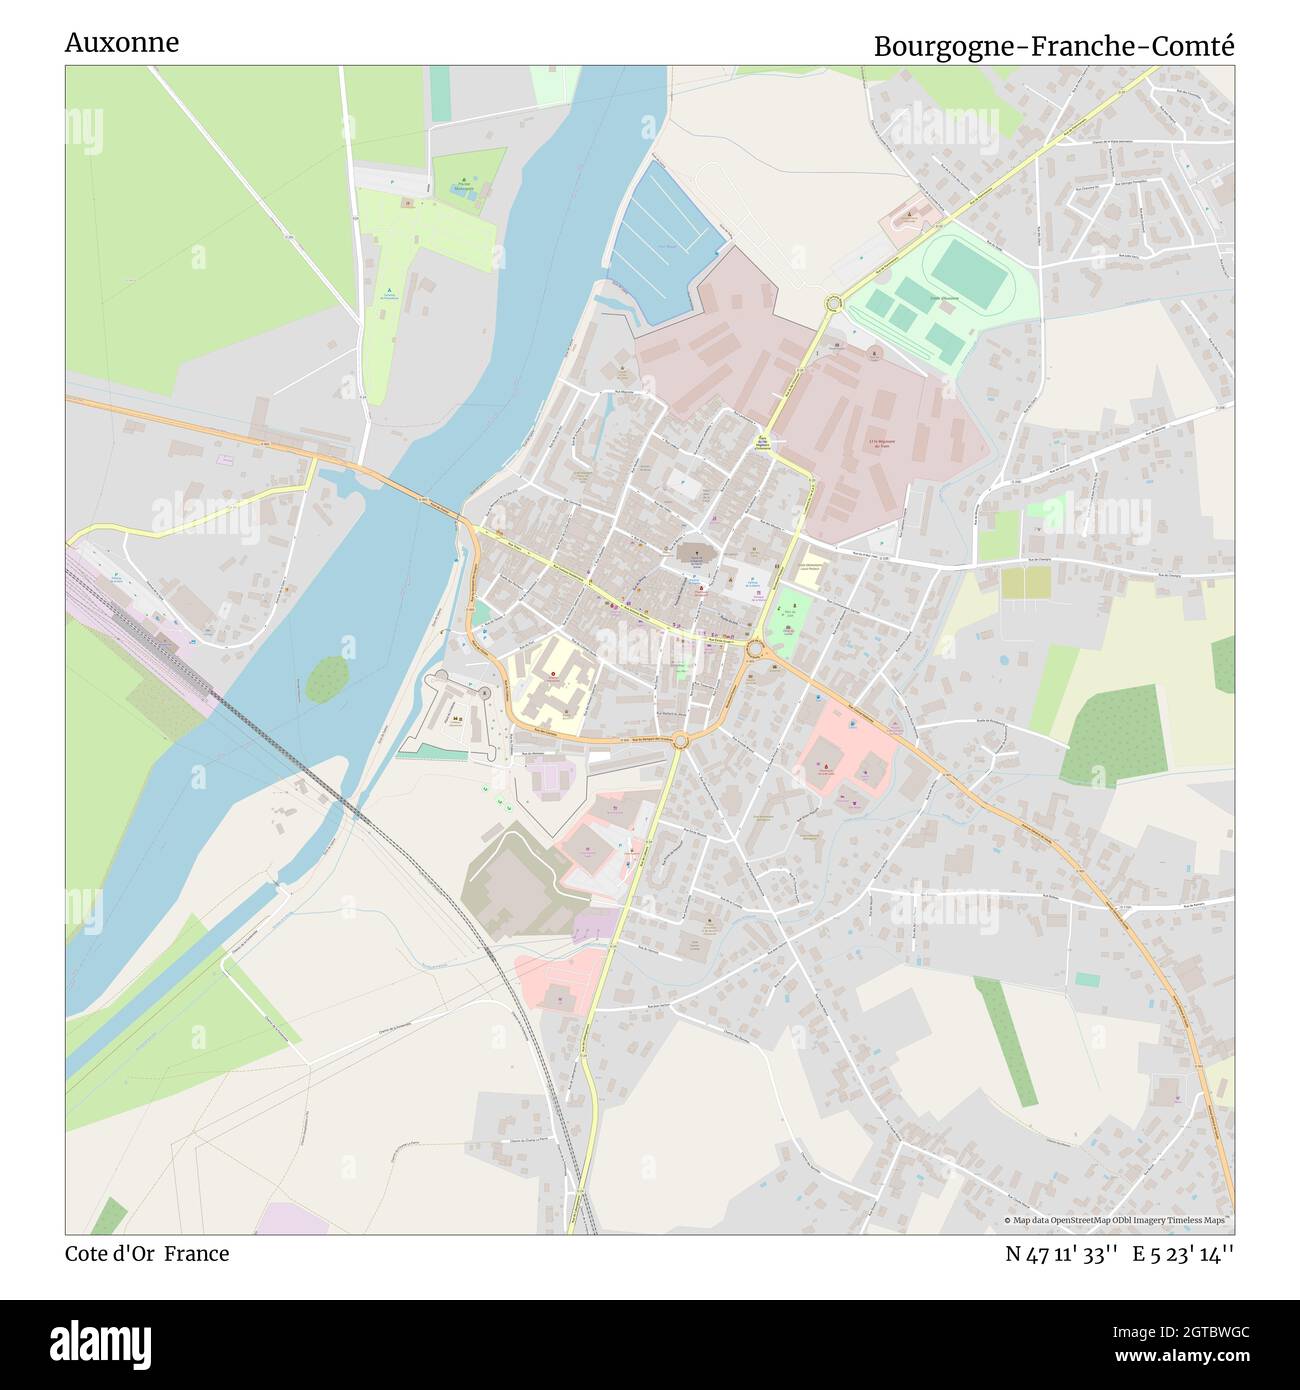 Auxonne, Cote d'Or, France, Bourgogne-Franche-Comté, N 47 11' 33'', E 5 23' 14'', map, Timeless Map published in 2021. Travelers, explorers and adventurers like Florence Nightingale, David Livingstone, Ernest Shackleton, Lewis and Clark and Sherlock Holmes relied on maps to plan travels to the world's most remote corners, Timeless Maps is mapping most locations on the globe, showing the achievement of great dreams Stock Photo